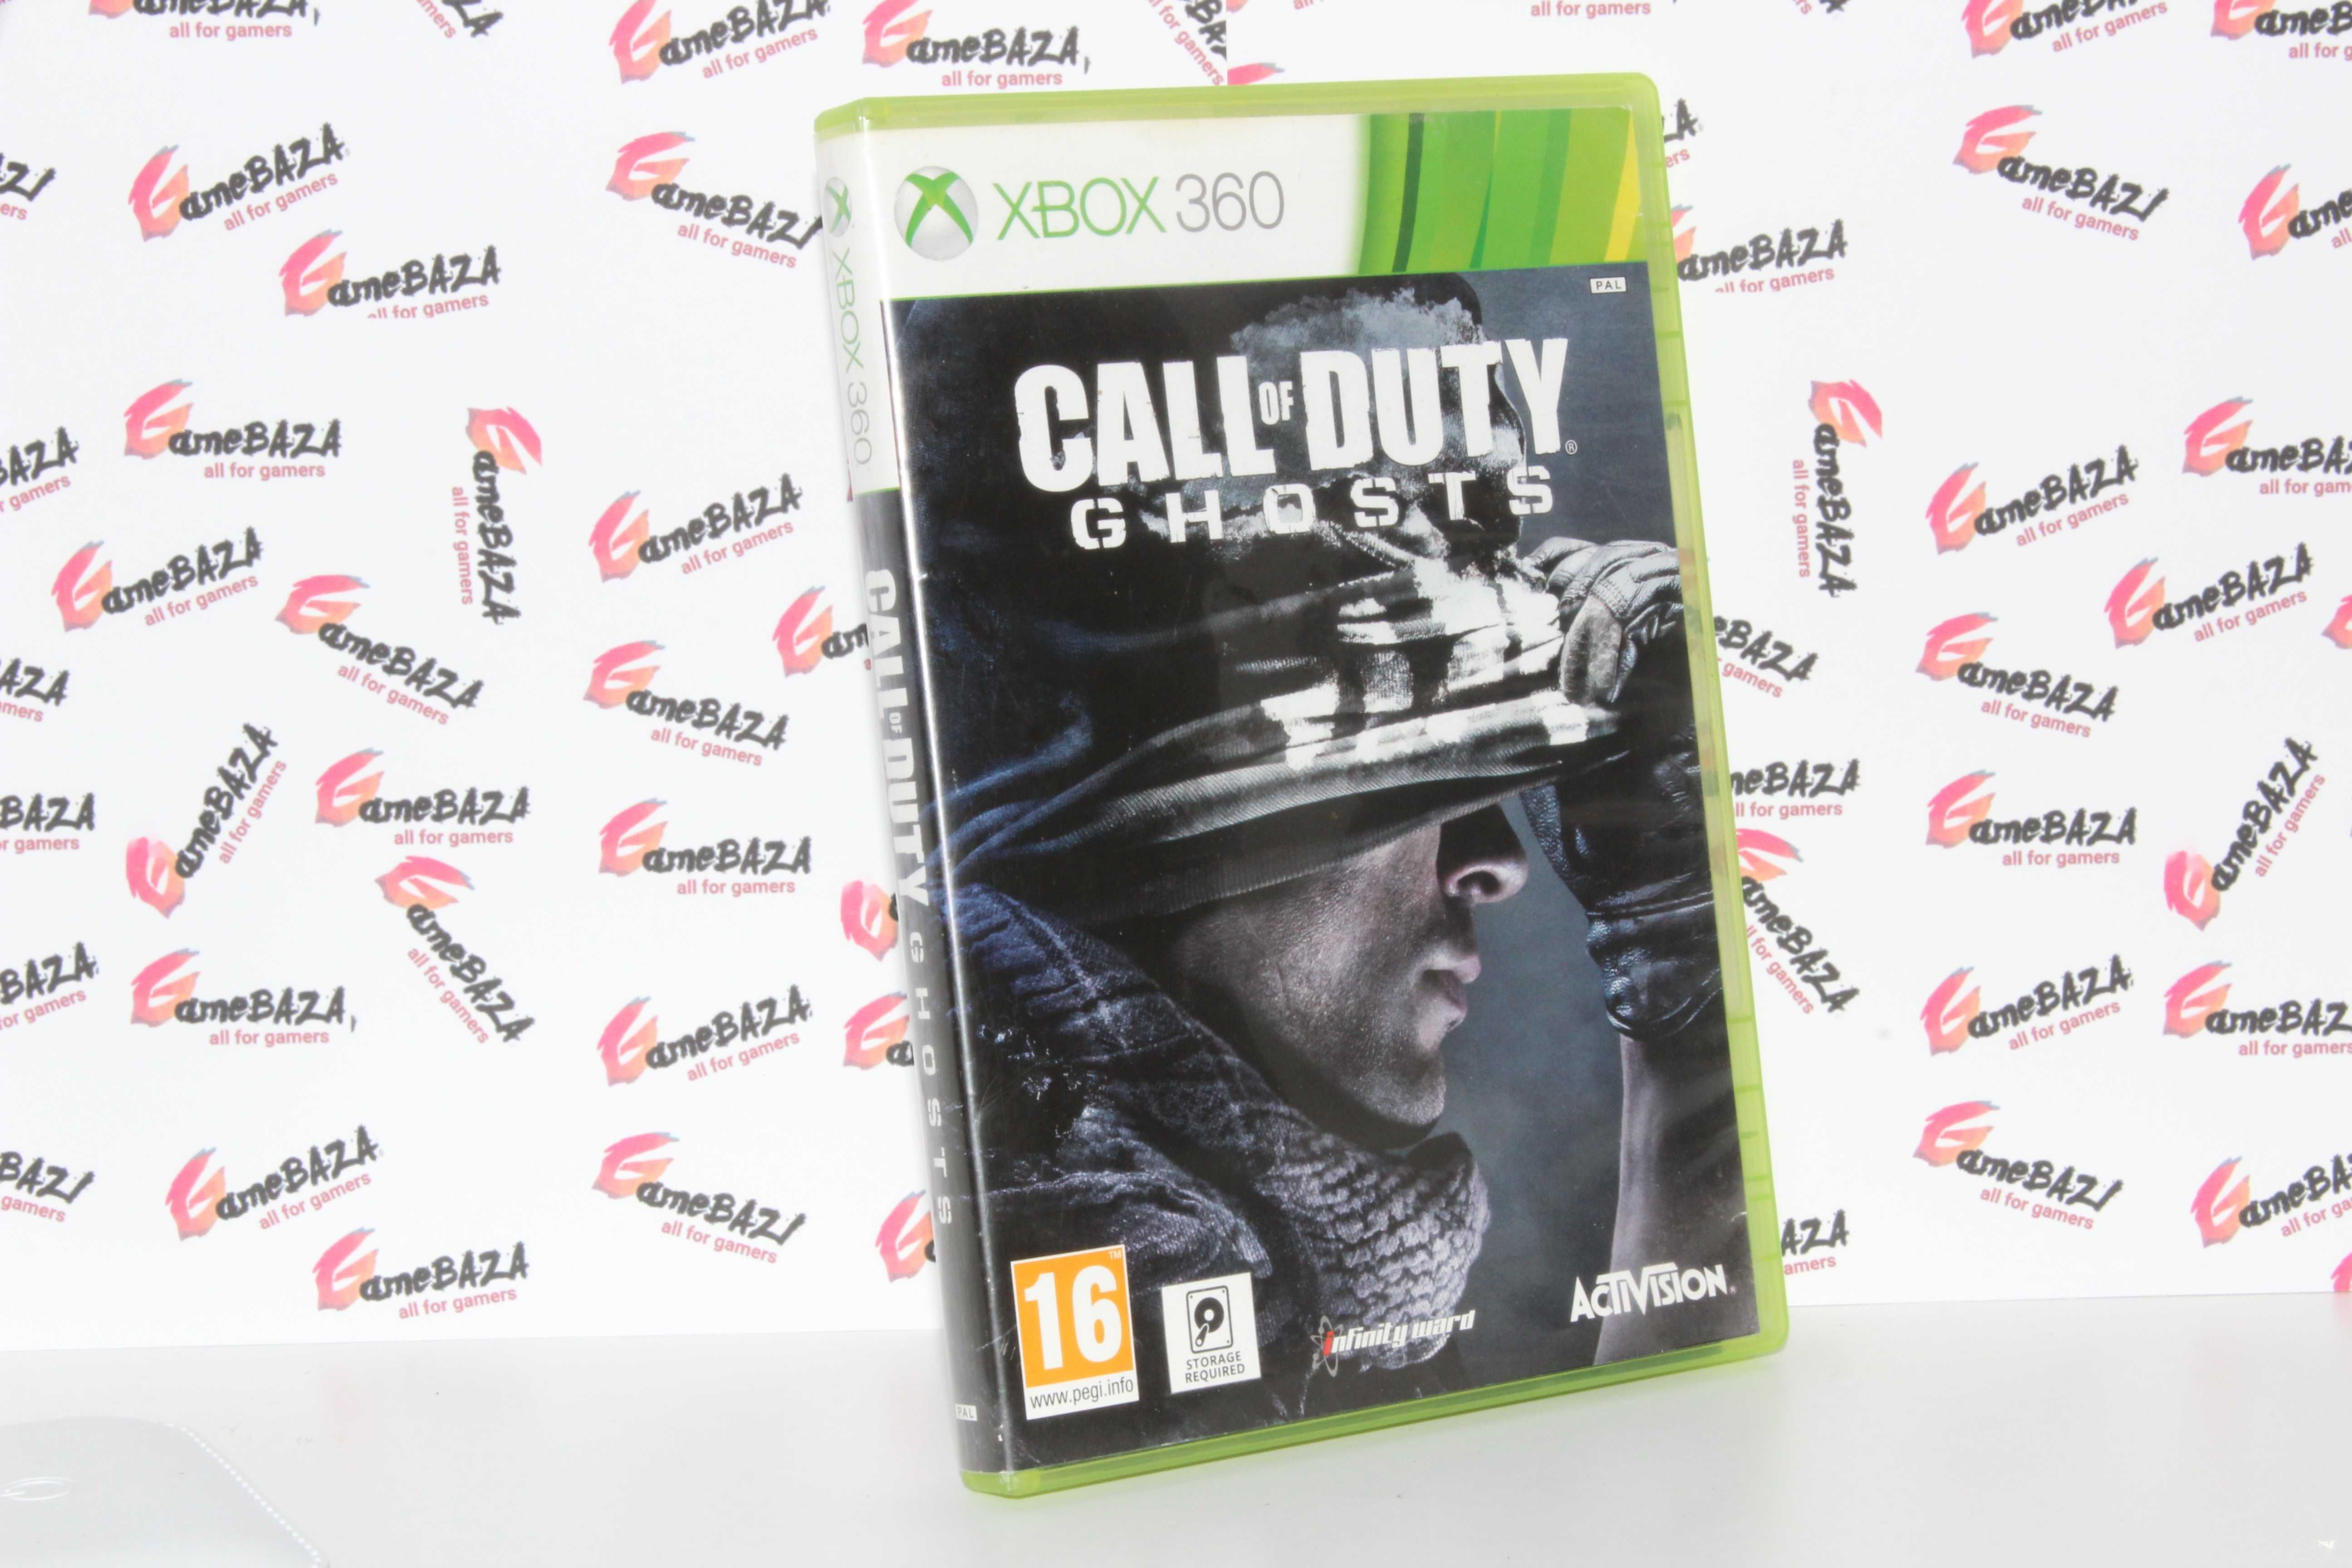 Call of Duty: Ghosts Xbox 360 GameBAZA